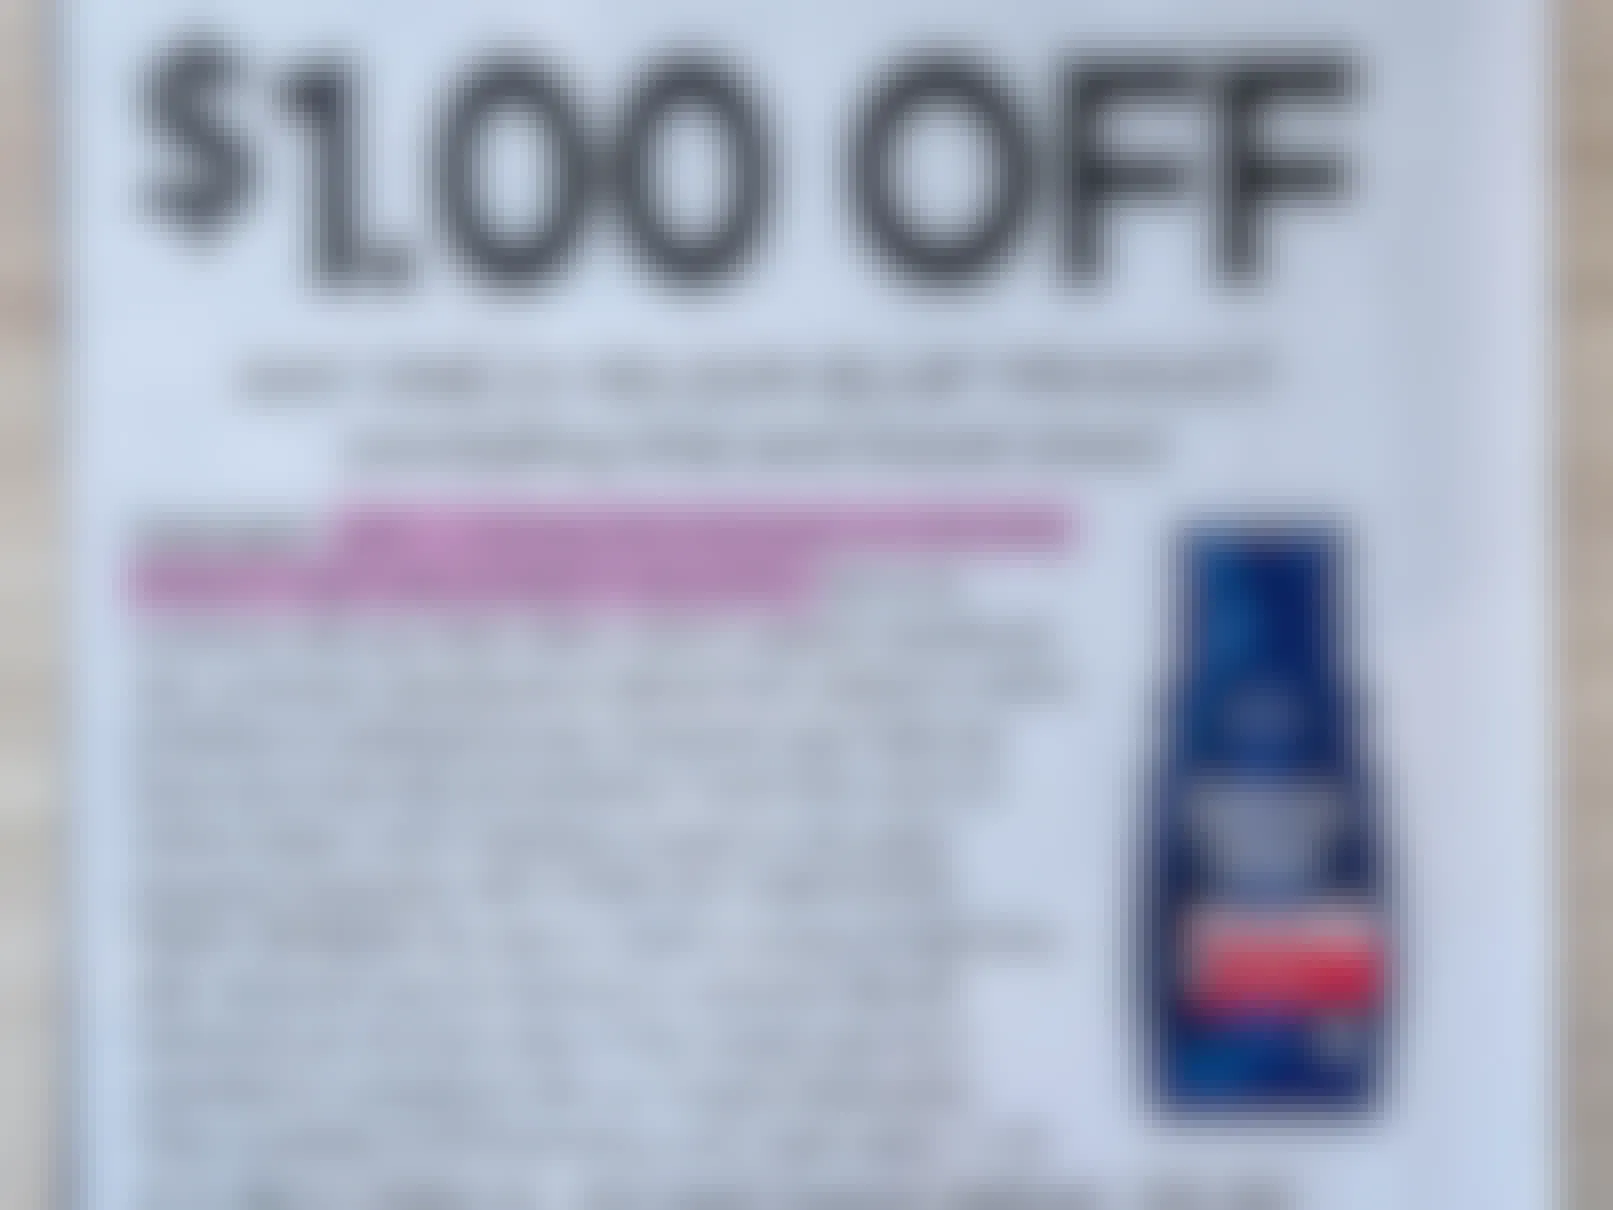 a $1 off coupon for any one Selsun Blue Product with the fine print highlighted that says, "Limit 1 coupon per purchase of specified product sizes and quantity indicated